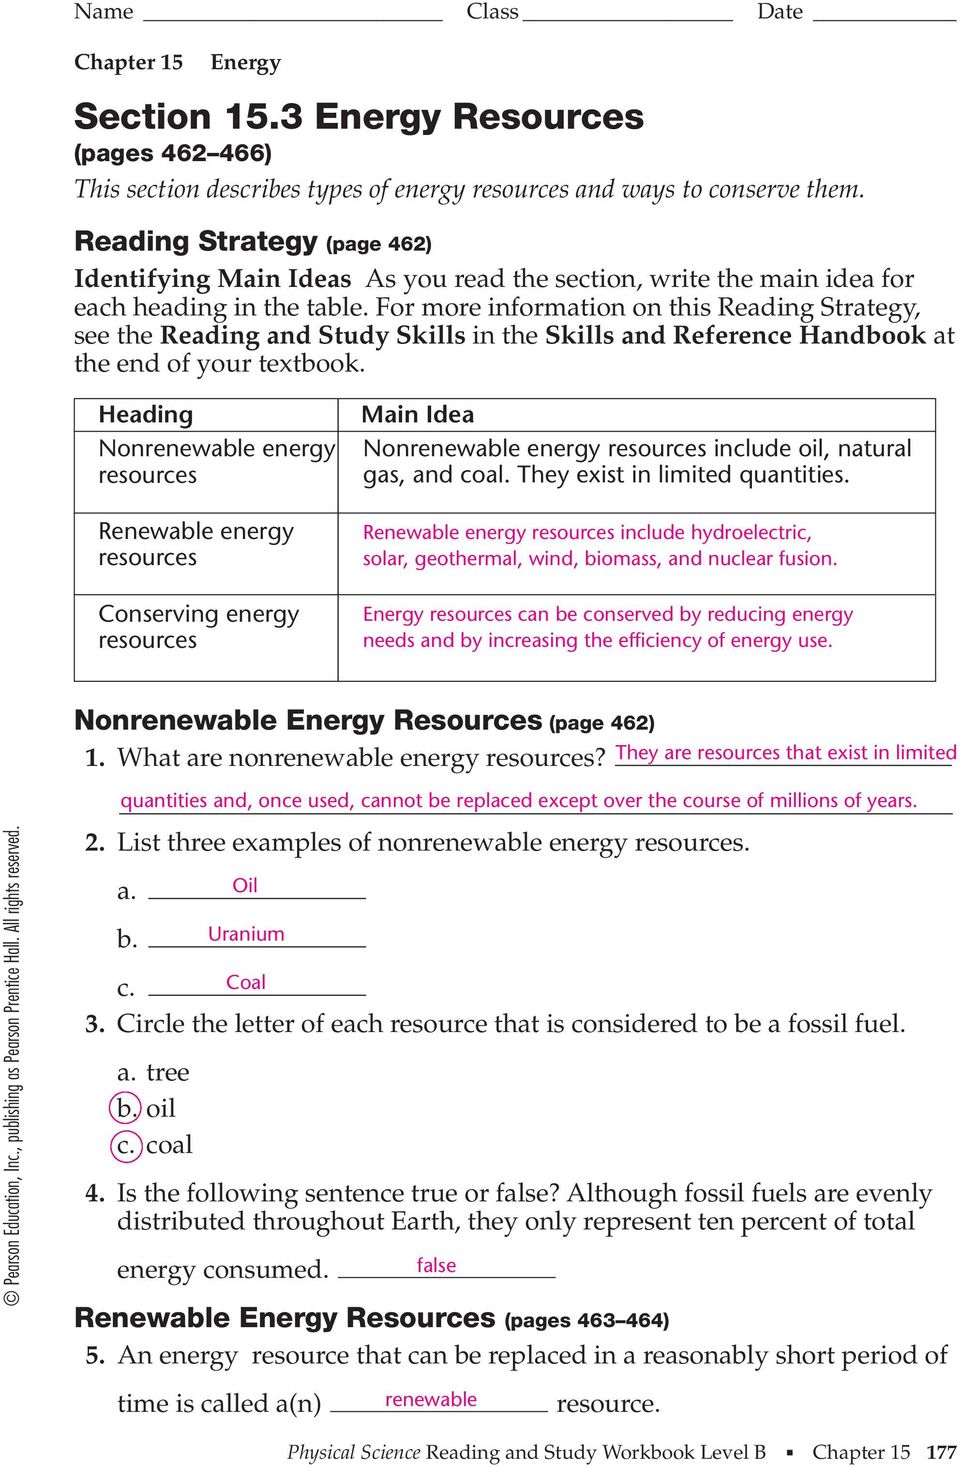 For more information on this Reading Strategy, see the Reading and Study Skills in the Skills and Reference Handbook at the end of your textbook.